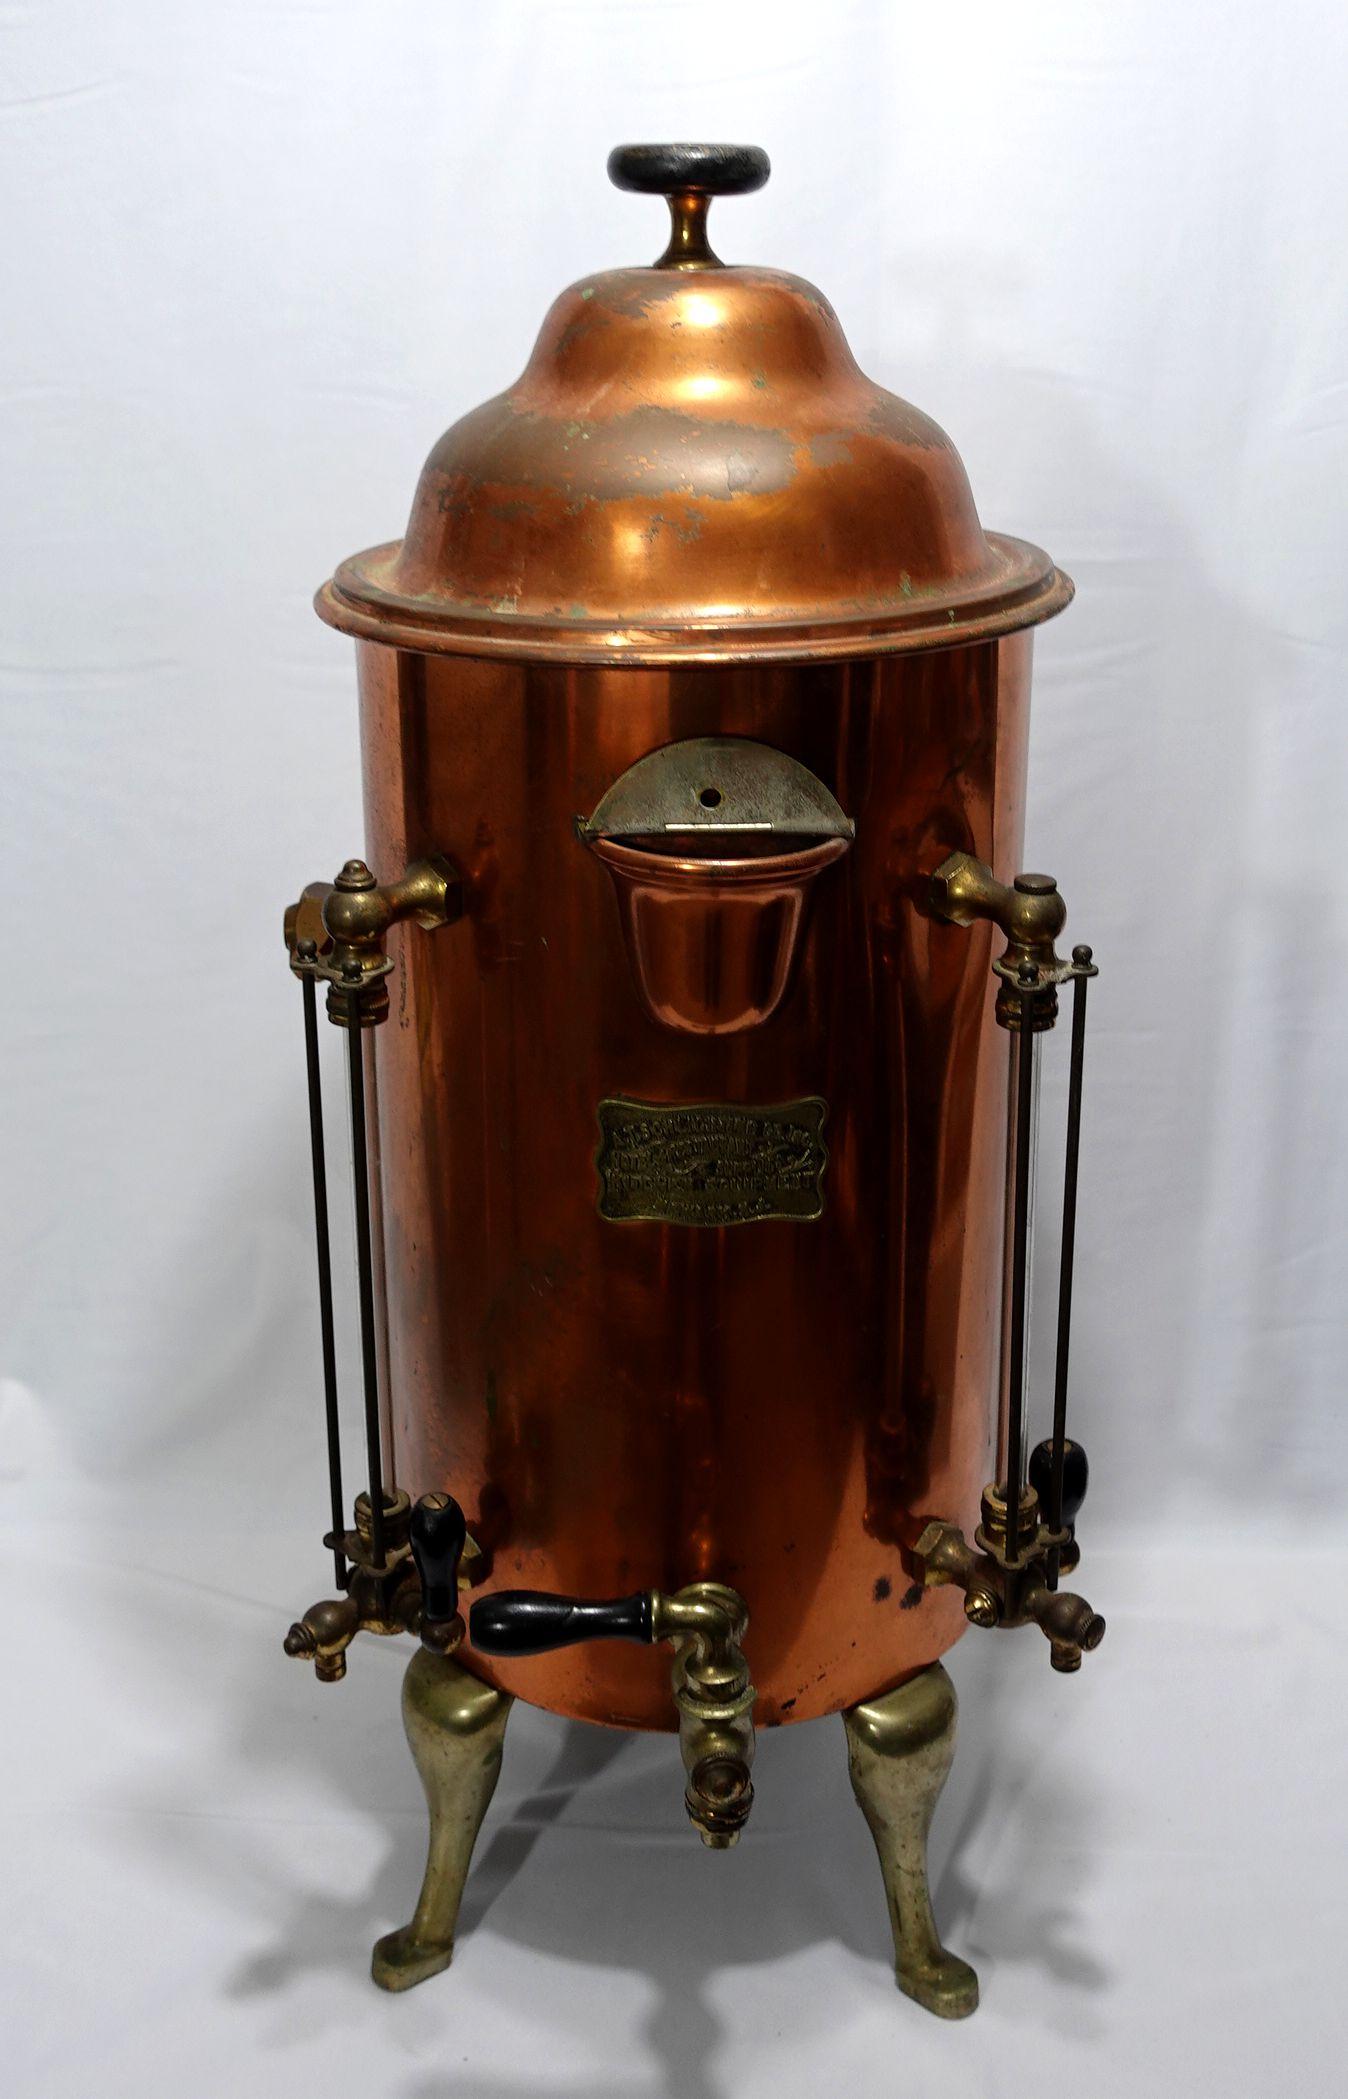 Large and heavy brass and copper hot water dispenser or coffee maker with attached brass label reading A. T. Schlighting Co. Inc. Hotel and Restaurant Supplies Kitchen equipment, Newark N.J. 32” h. x 12” diameter,